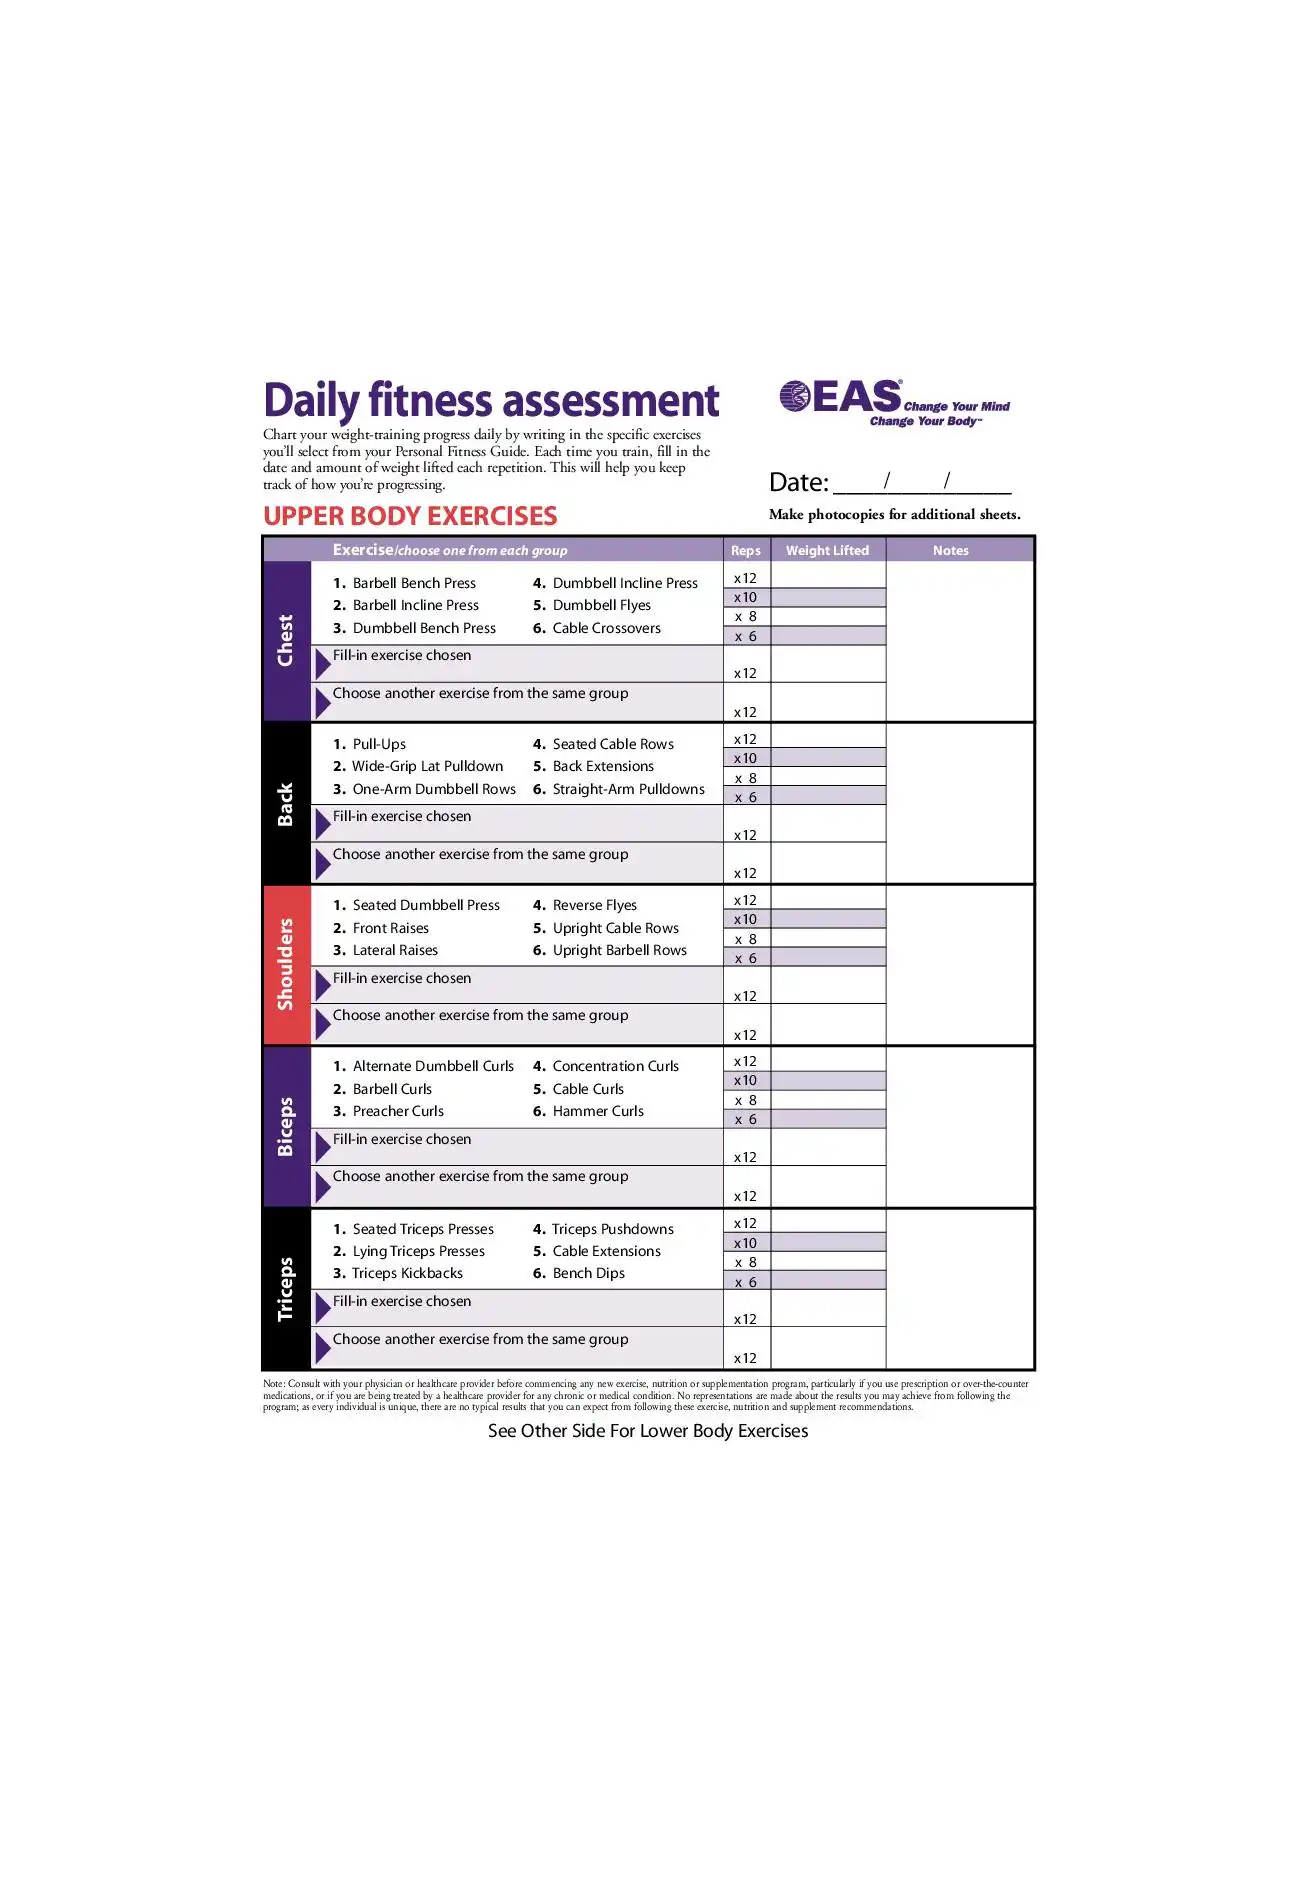 Daily fitness assessment